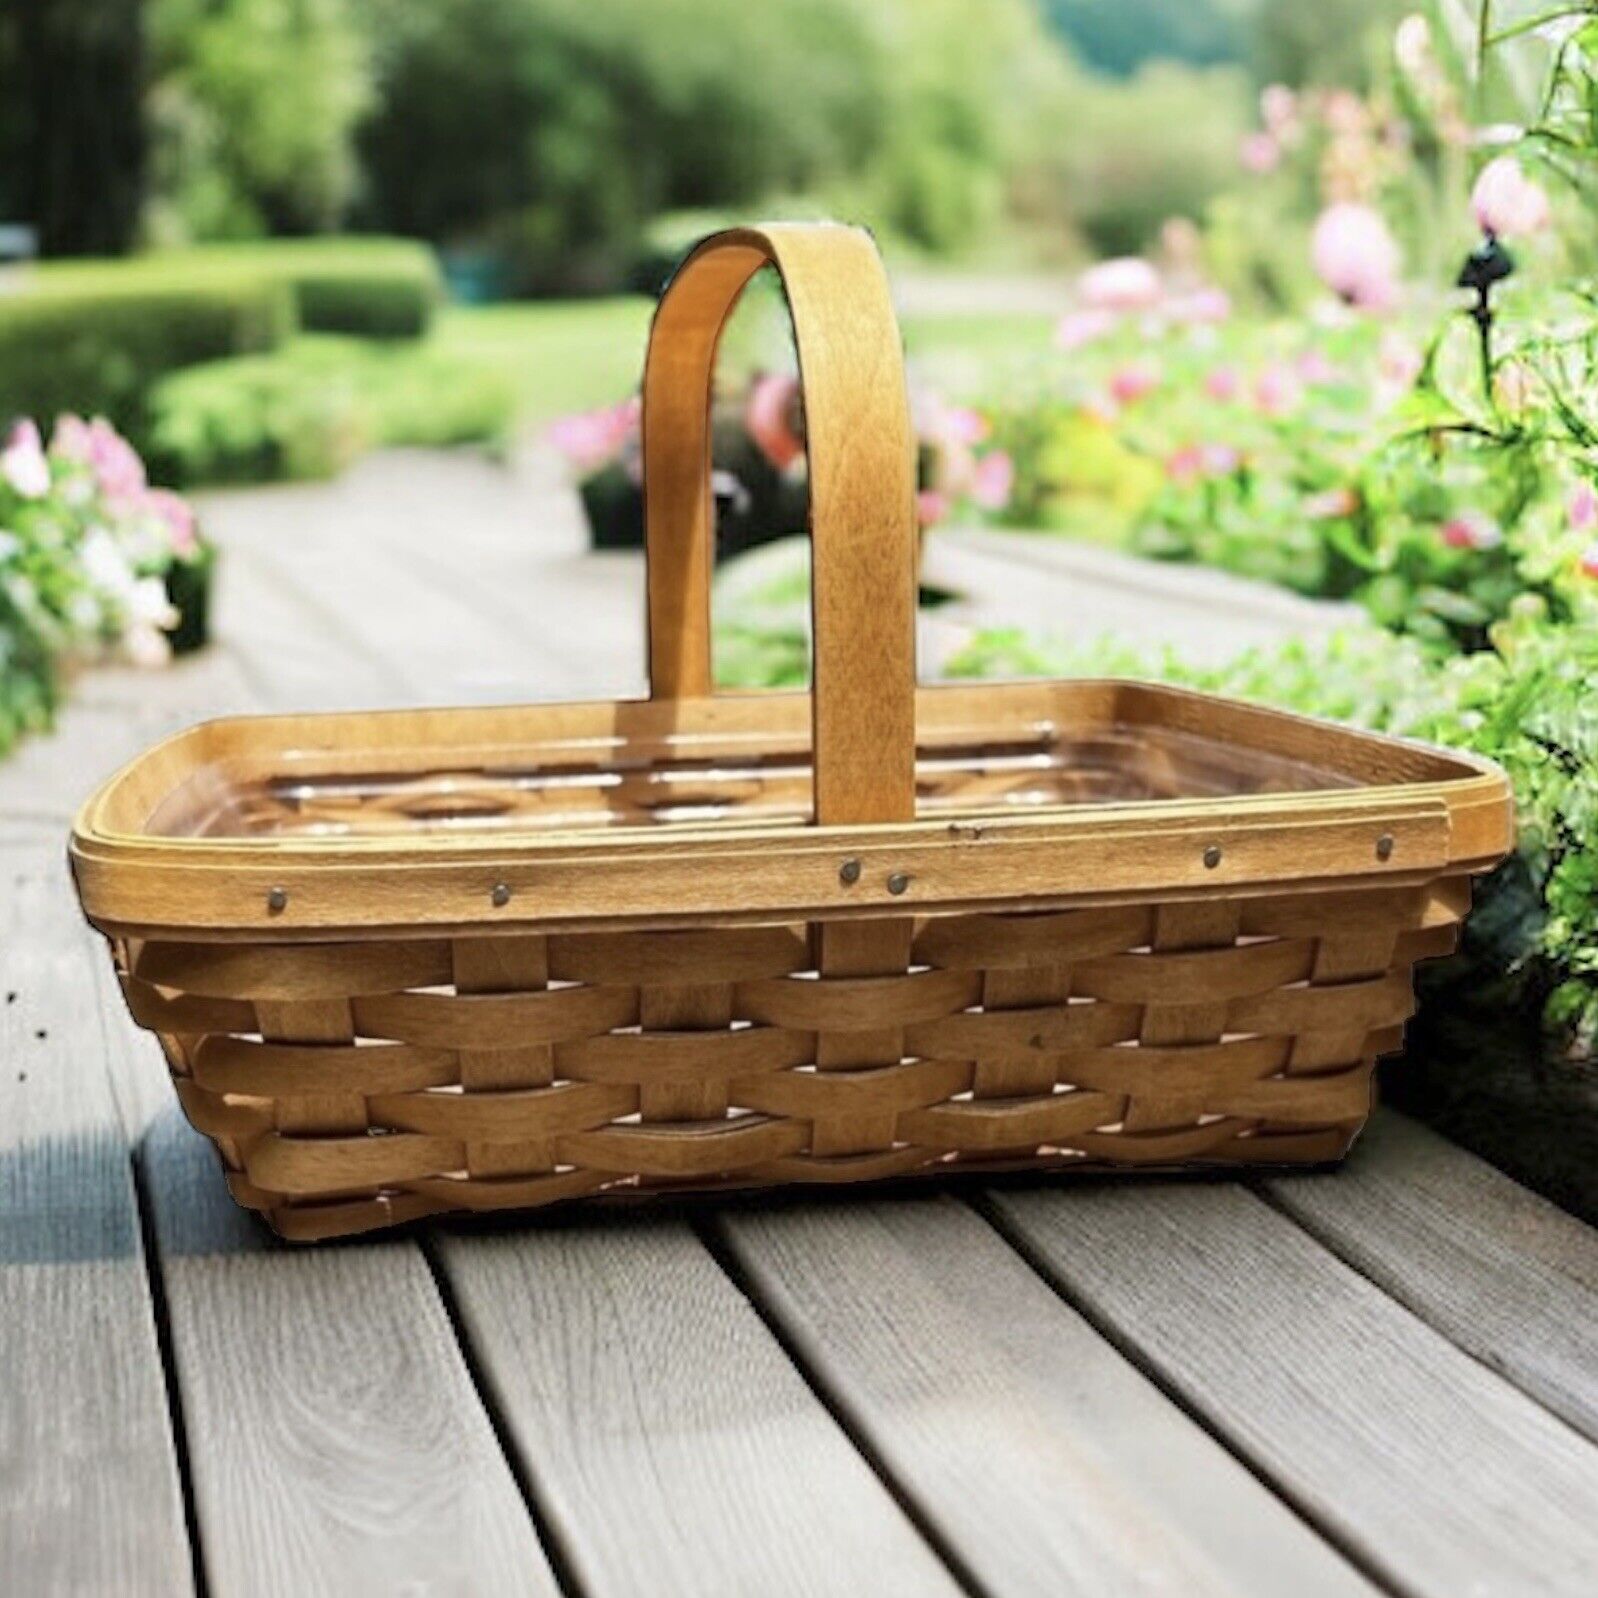 🌻Longaberger Year 2005 Wooden Basket with Handle.